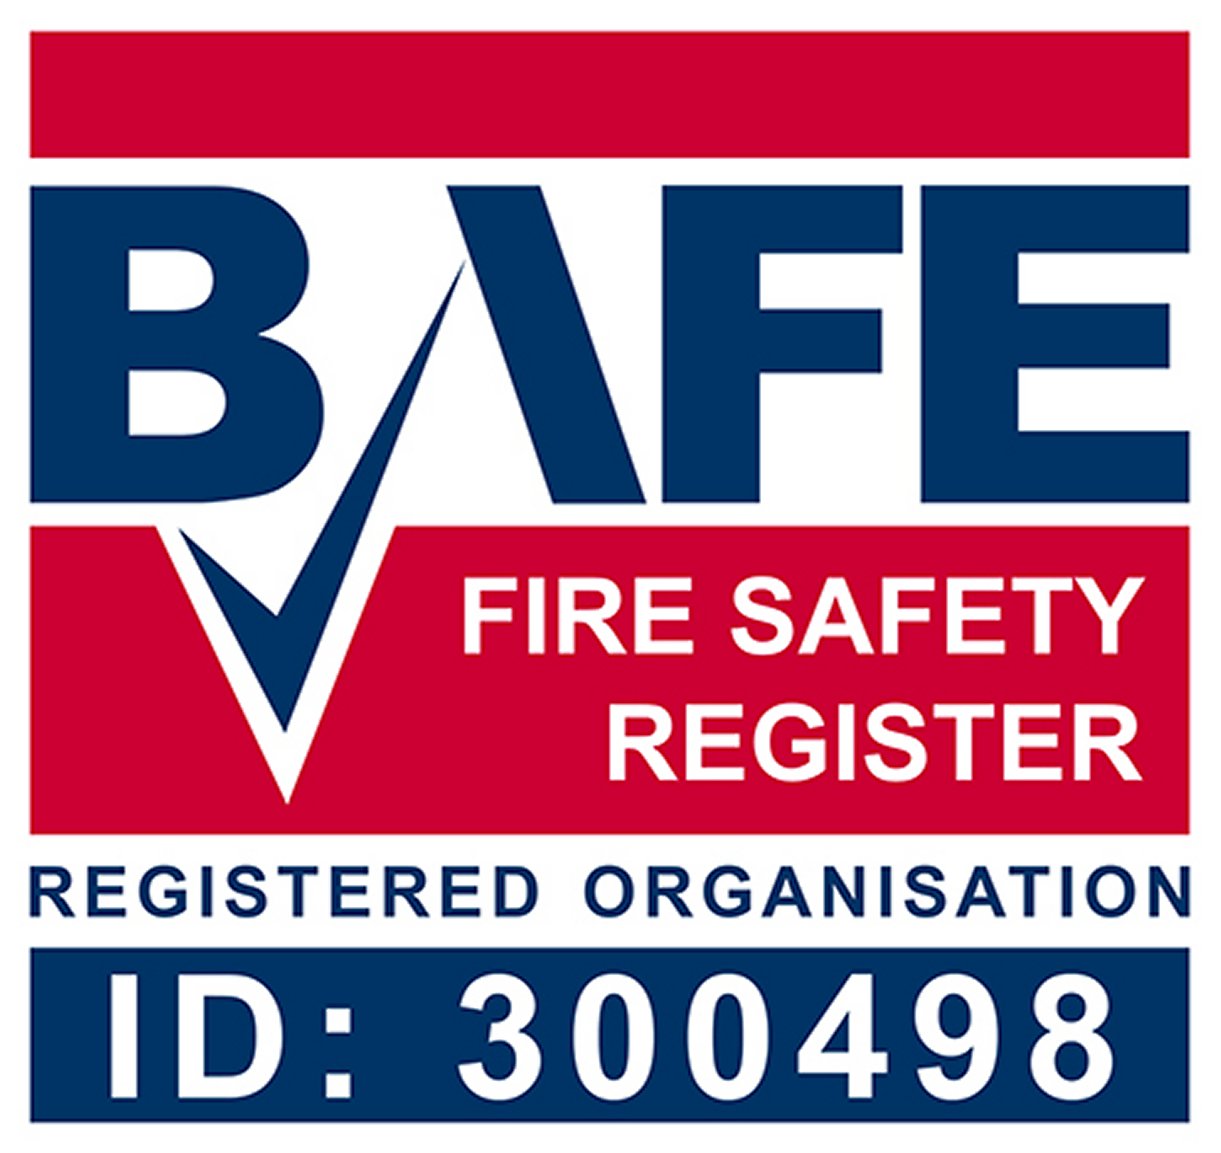 Securitech Fire & Security the East Midlands BAFE Certified